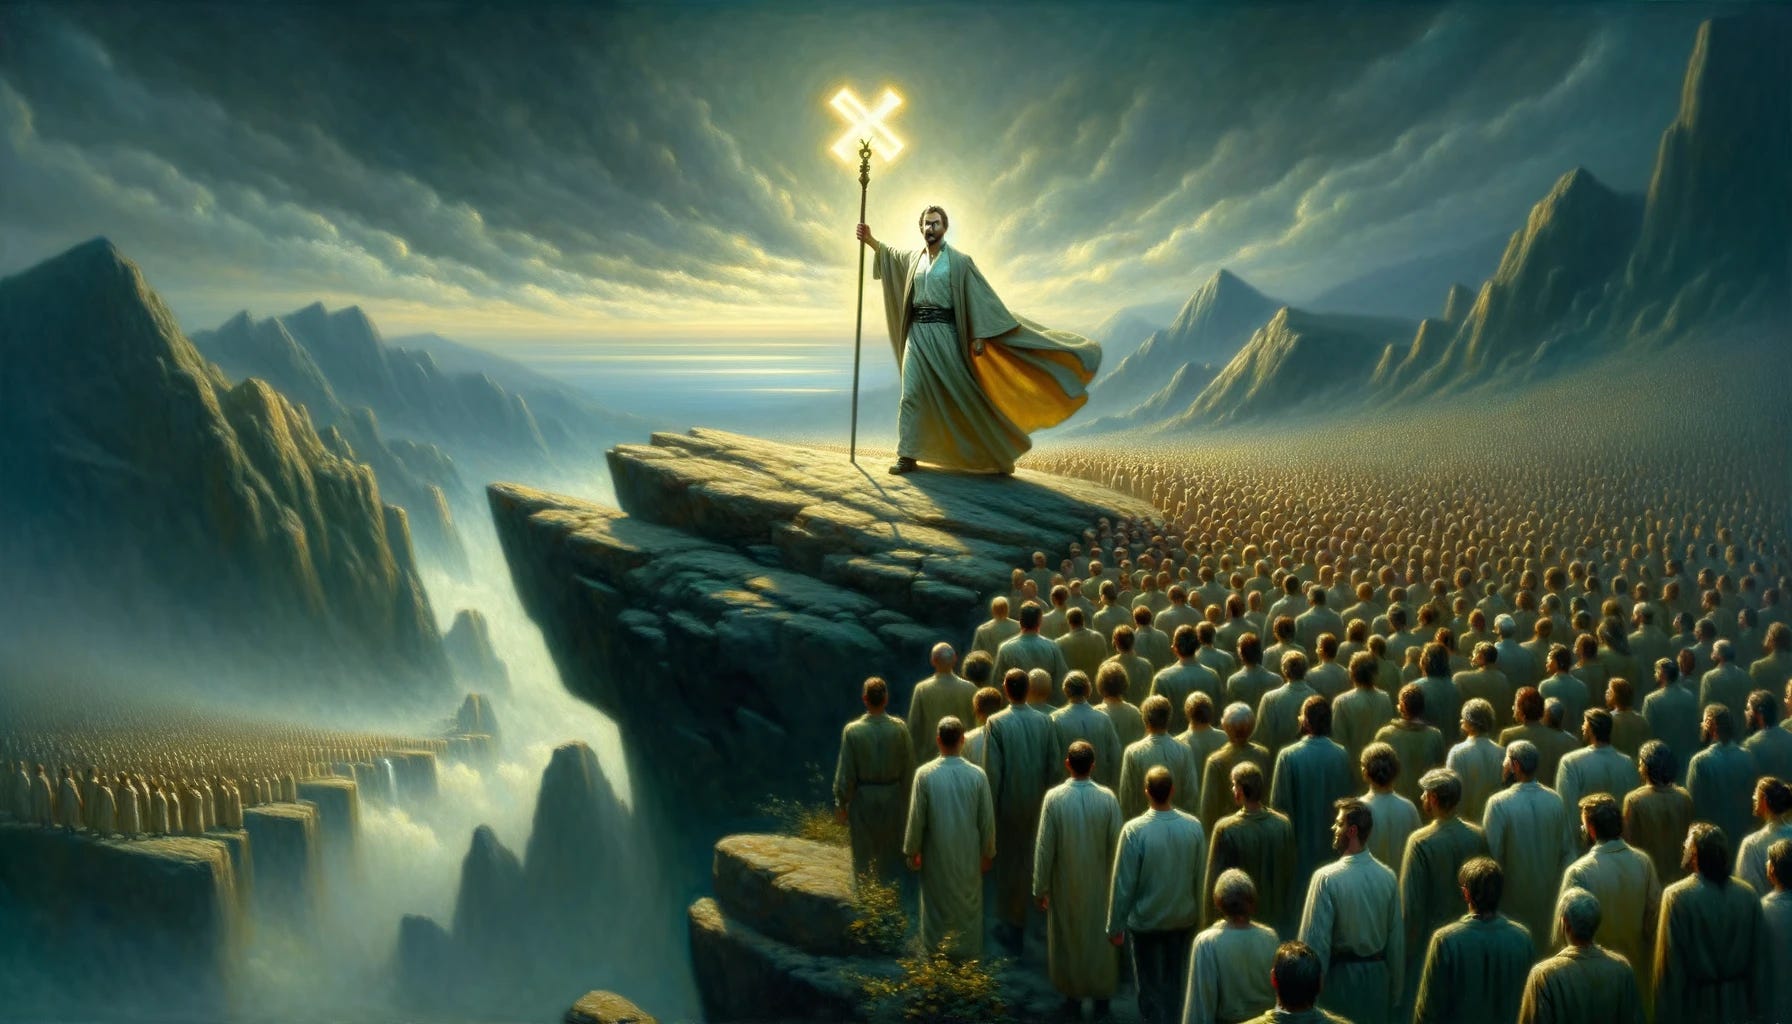 Based on photo 2: Oil painting of a dominant cult leader leading a vast sea of followers dressed in ordinary attire towards the edge of a steep cliff. The leader, with a powerful aura, confidently holds a staff adorned with a prominently glowing X-symbol. The cliff's jagged edge and the atmospheric horizon create a sense of impending danger and highlight the blind faith of the followers.